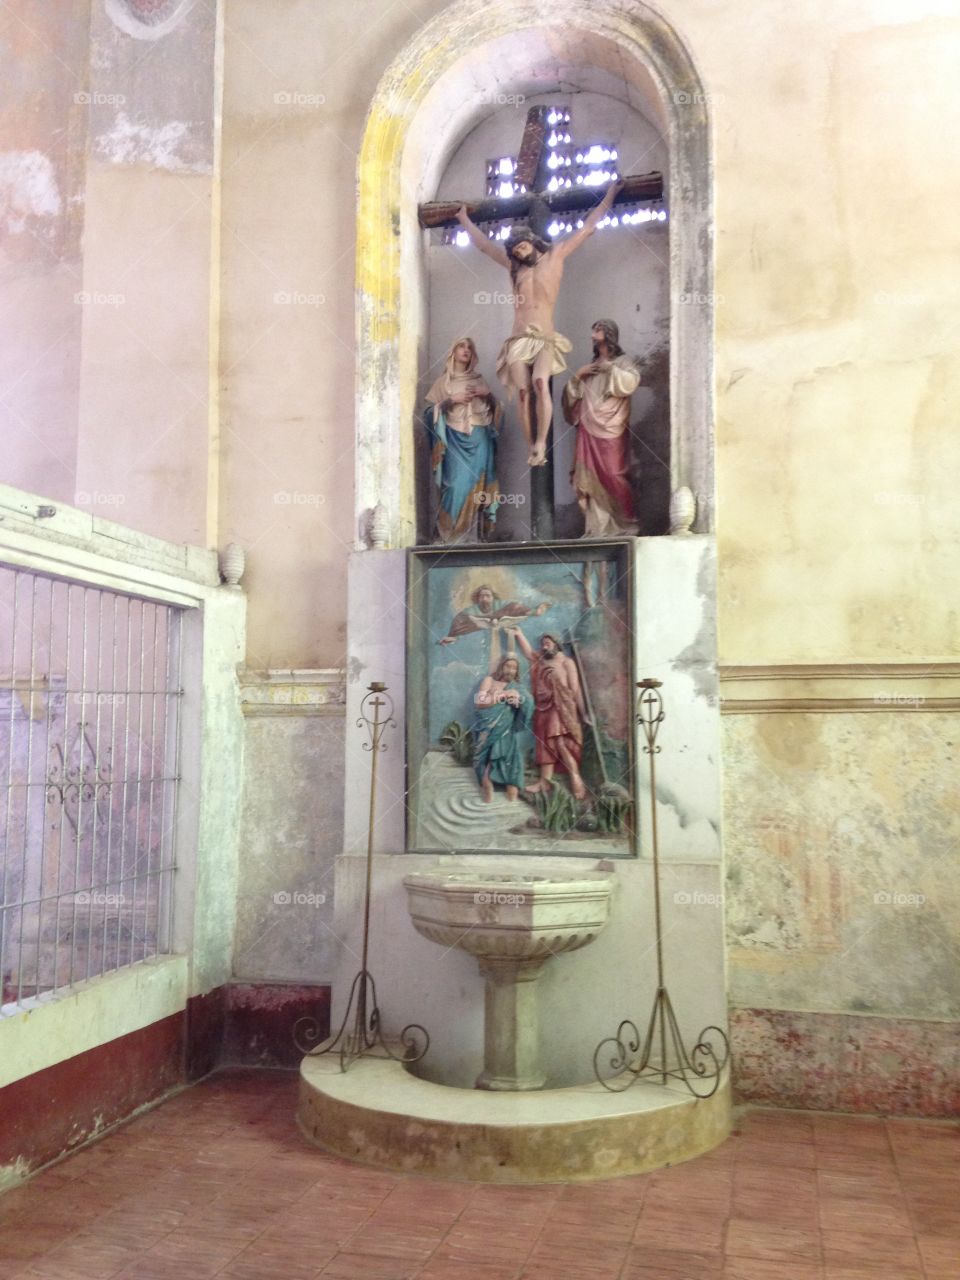 this is an antque baptismal pool inside one of the oldest church in the philippines constructed by spain sometime 1800